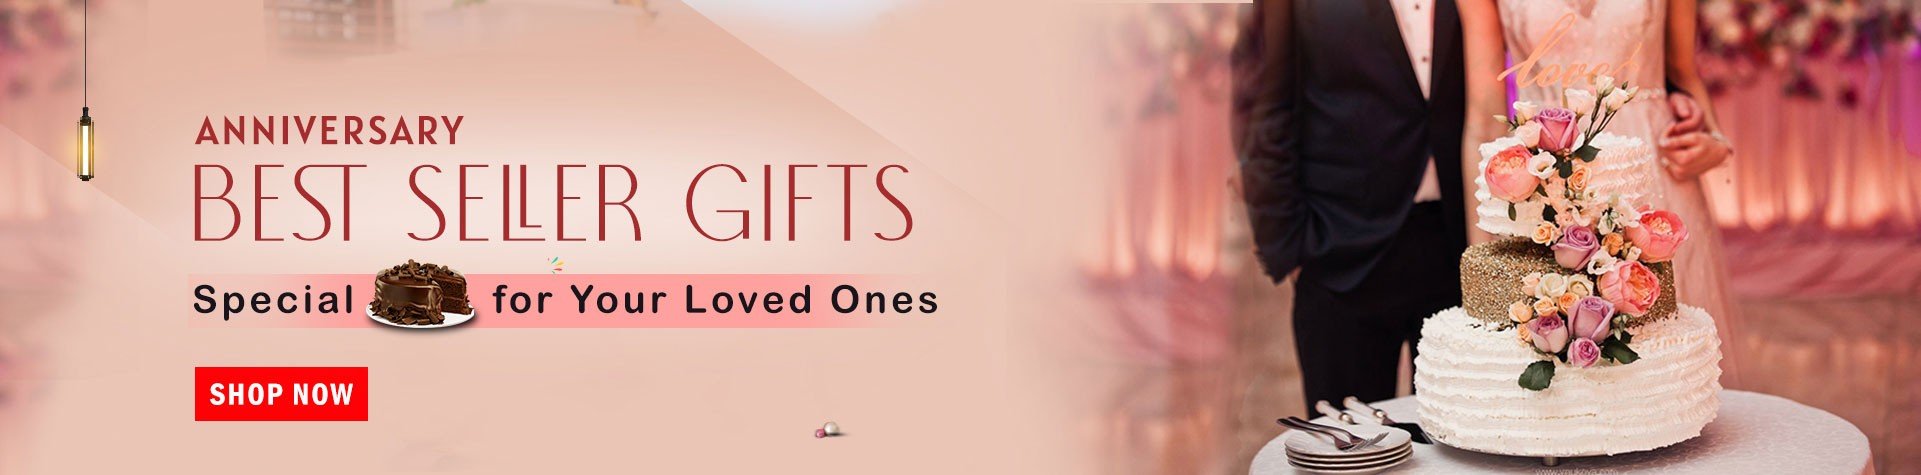 Anniversary Bestseller Gifts Online India